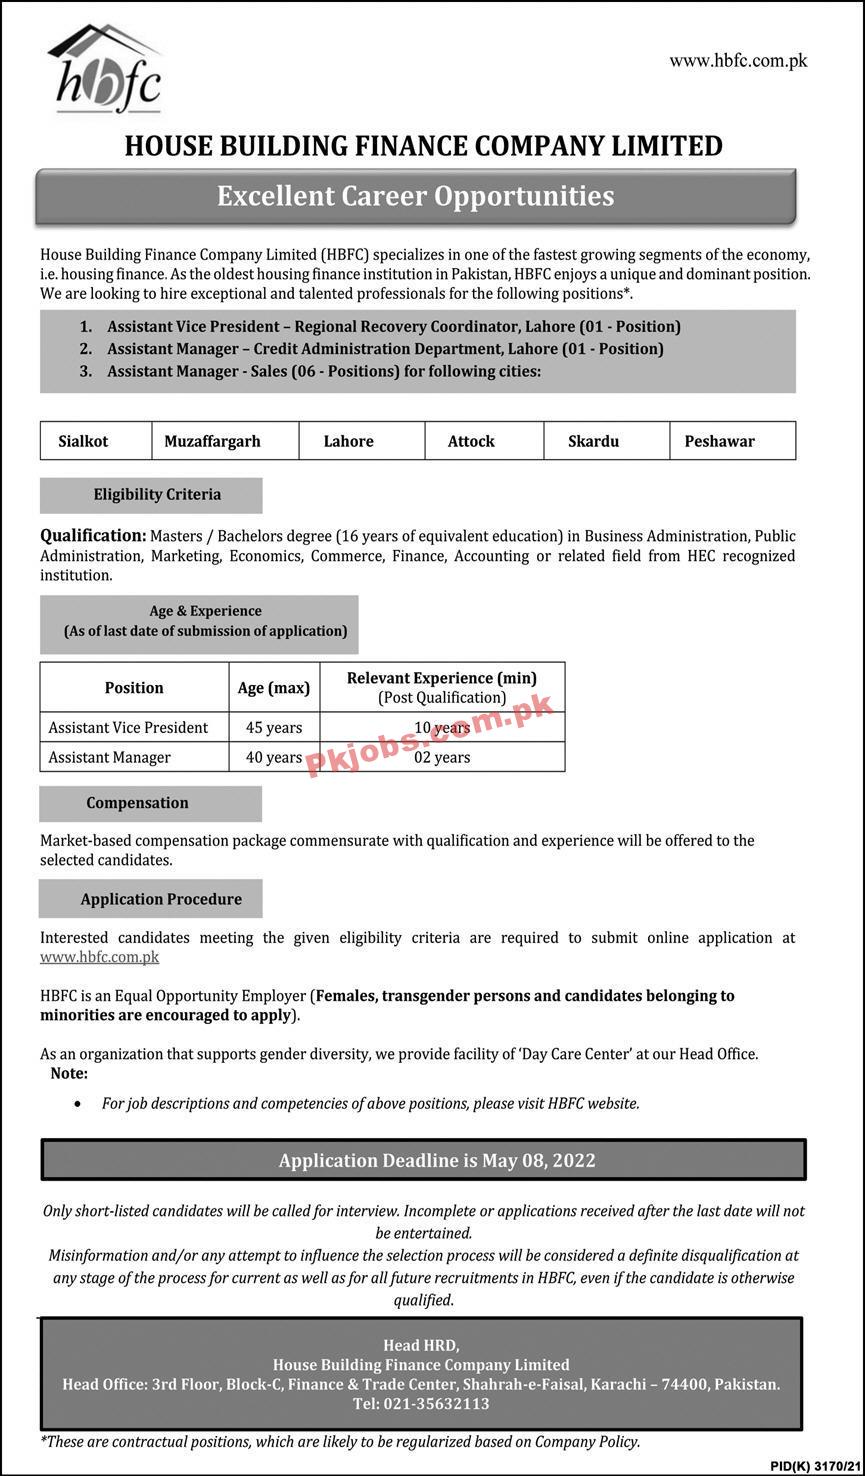 HBFCL Jobs 2022 | House Building Finance Company Limited HBFCL Headquarters Management Jobs 2022